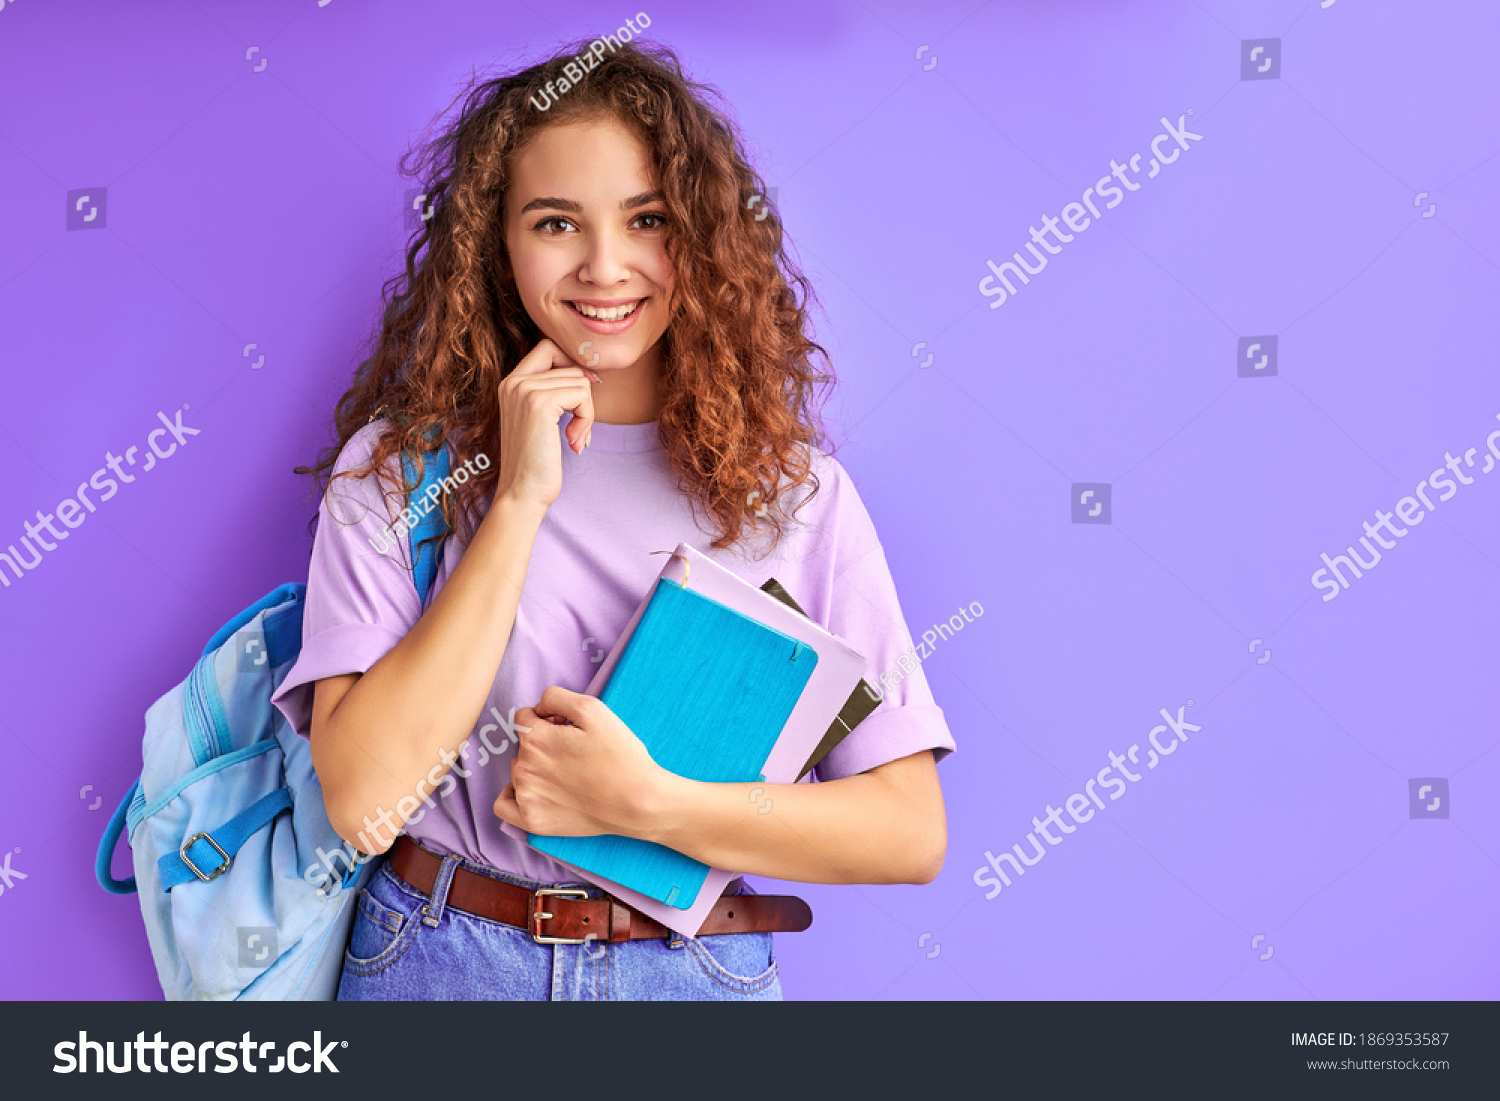 sweet caucasian friendly young student girl holding colorful exercise books, ready to study #1869353587